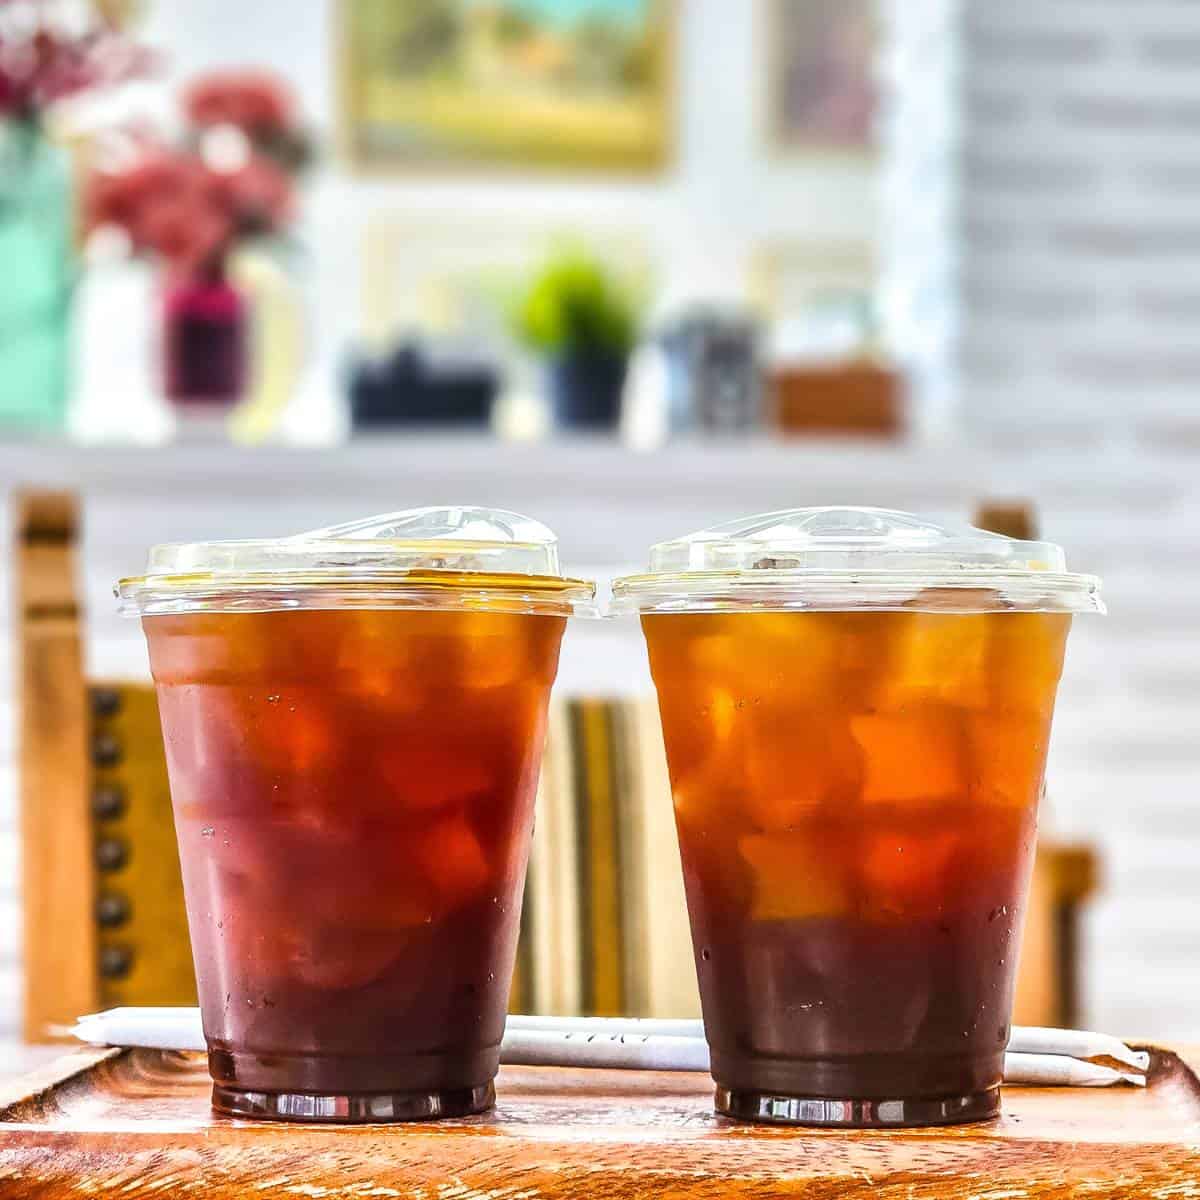 Two cups of iced coffee, a popular Filipino drink, sitting on a wooden table.